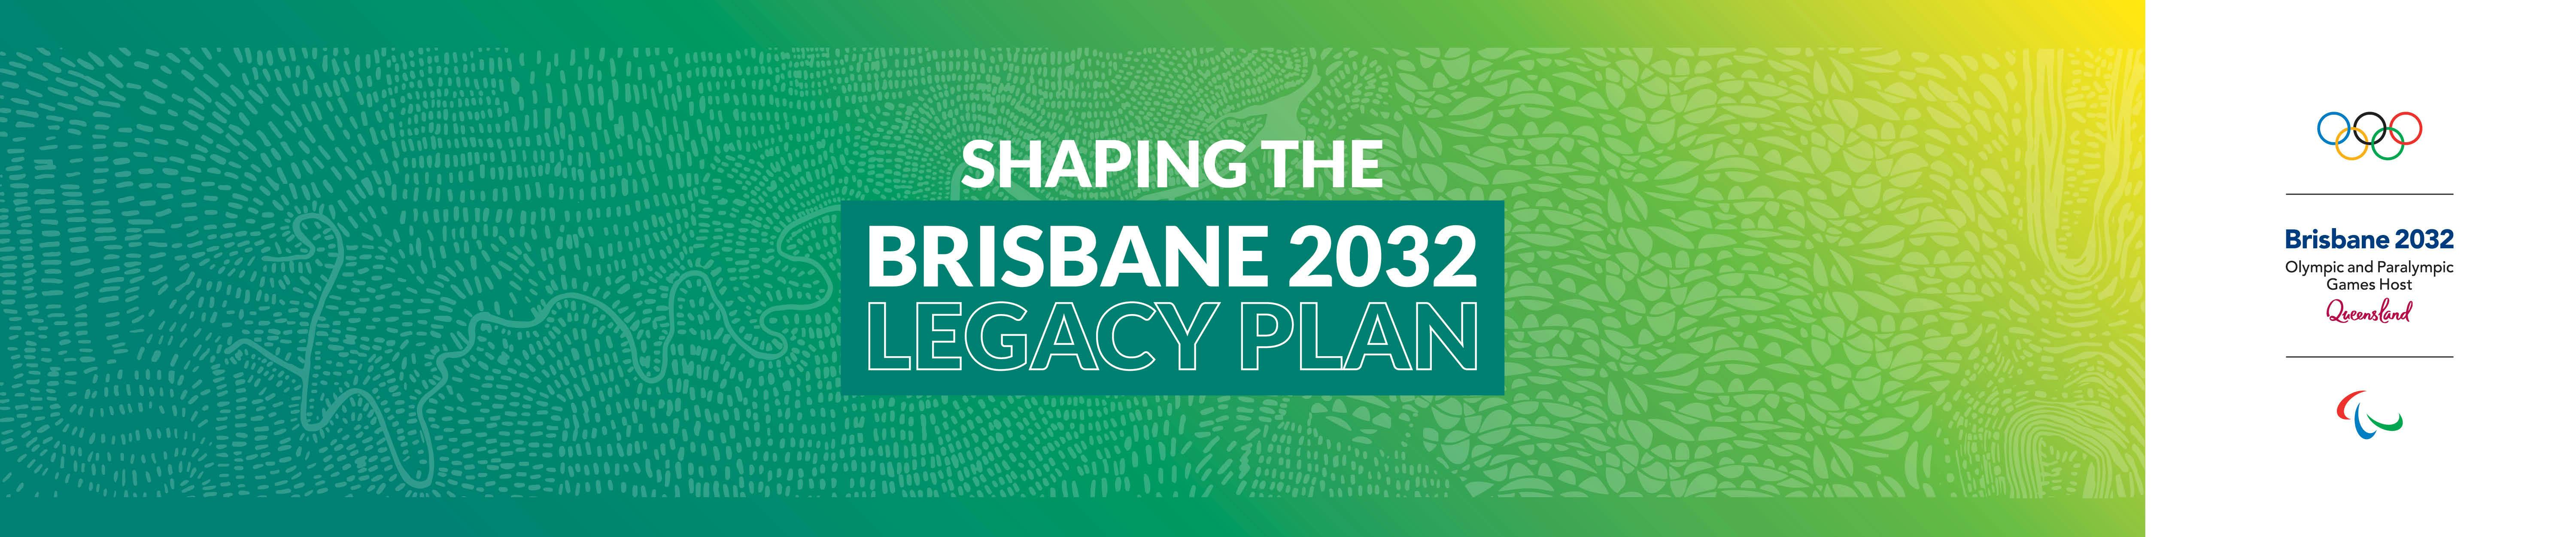 Shaping the Brisbane 2032 Legacy Plan banner with logo